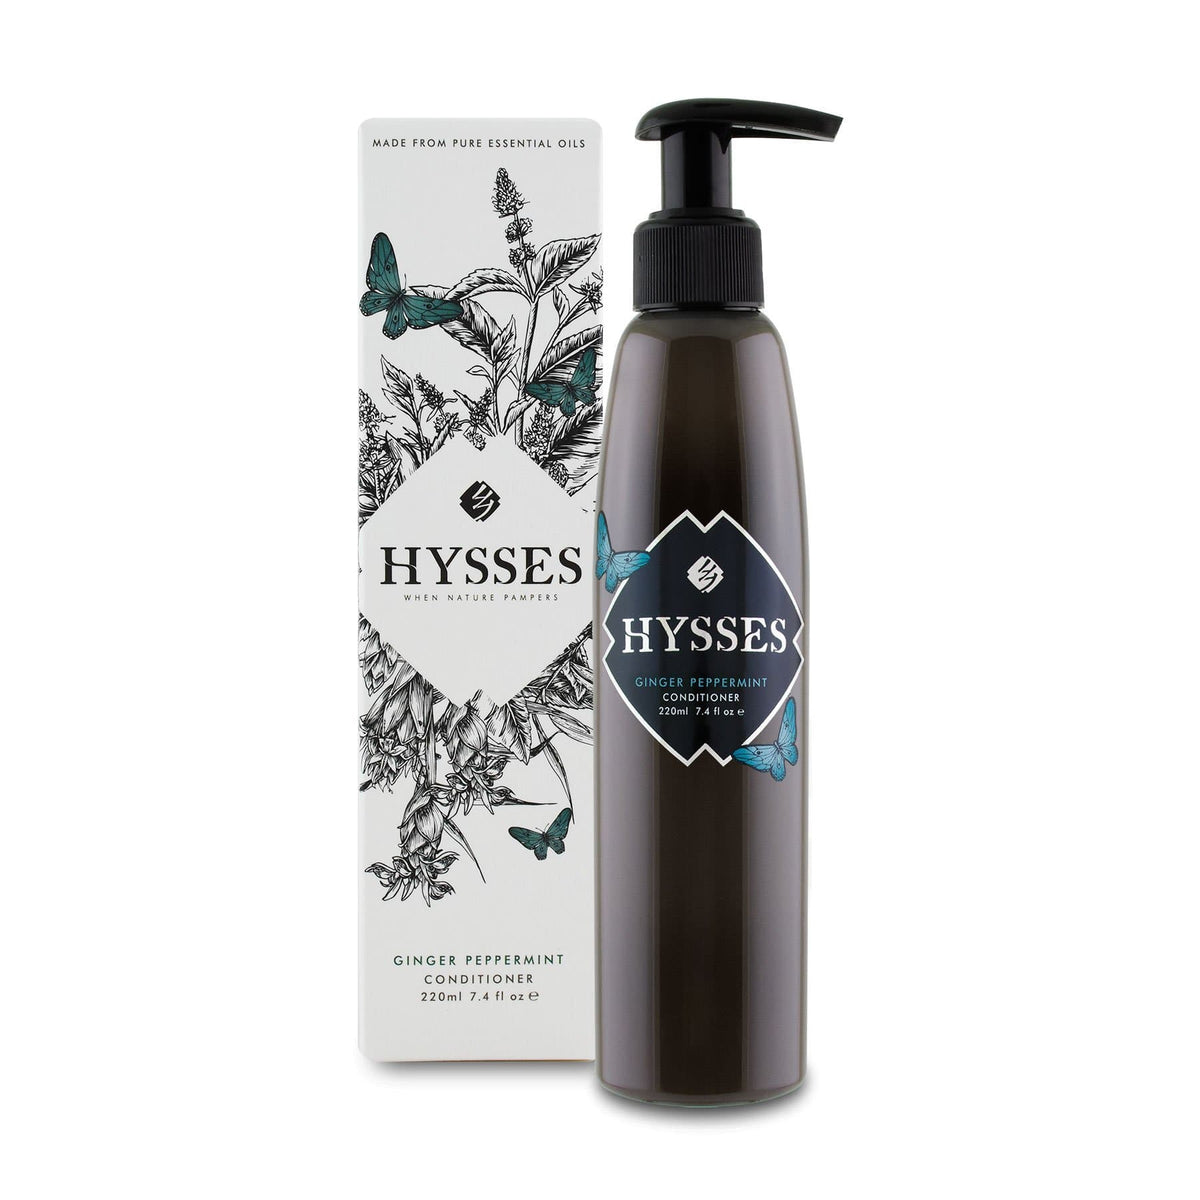 Hysses Hair Care 220ml Conditioner Ginger Peppermint, 220ml